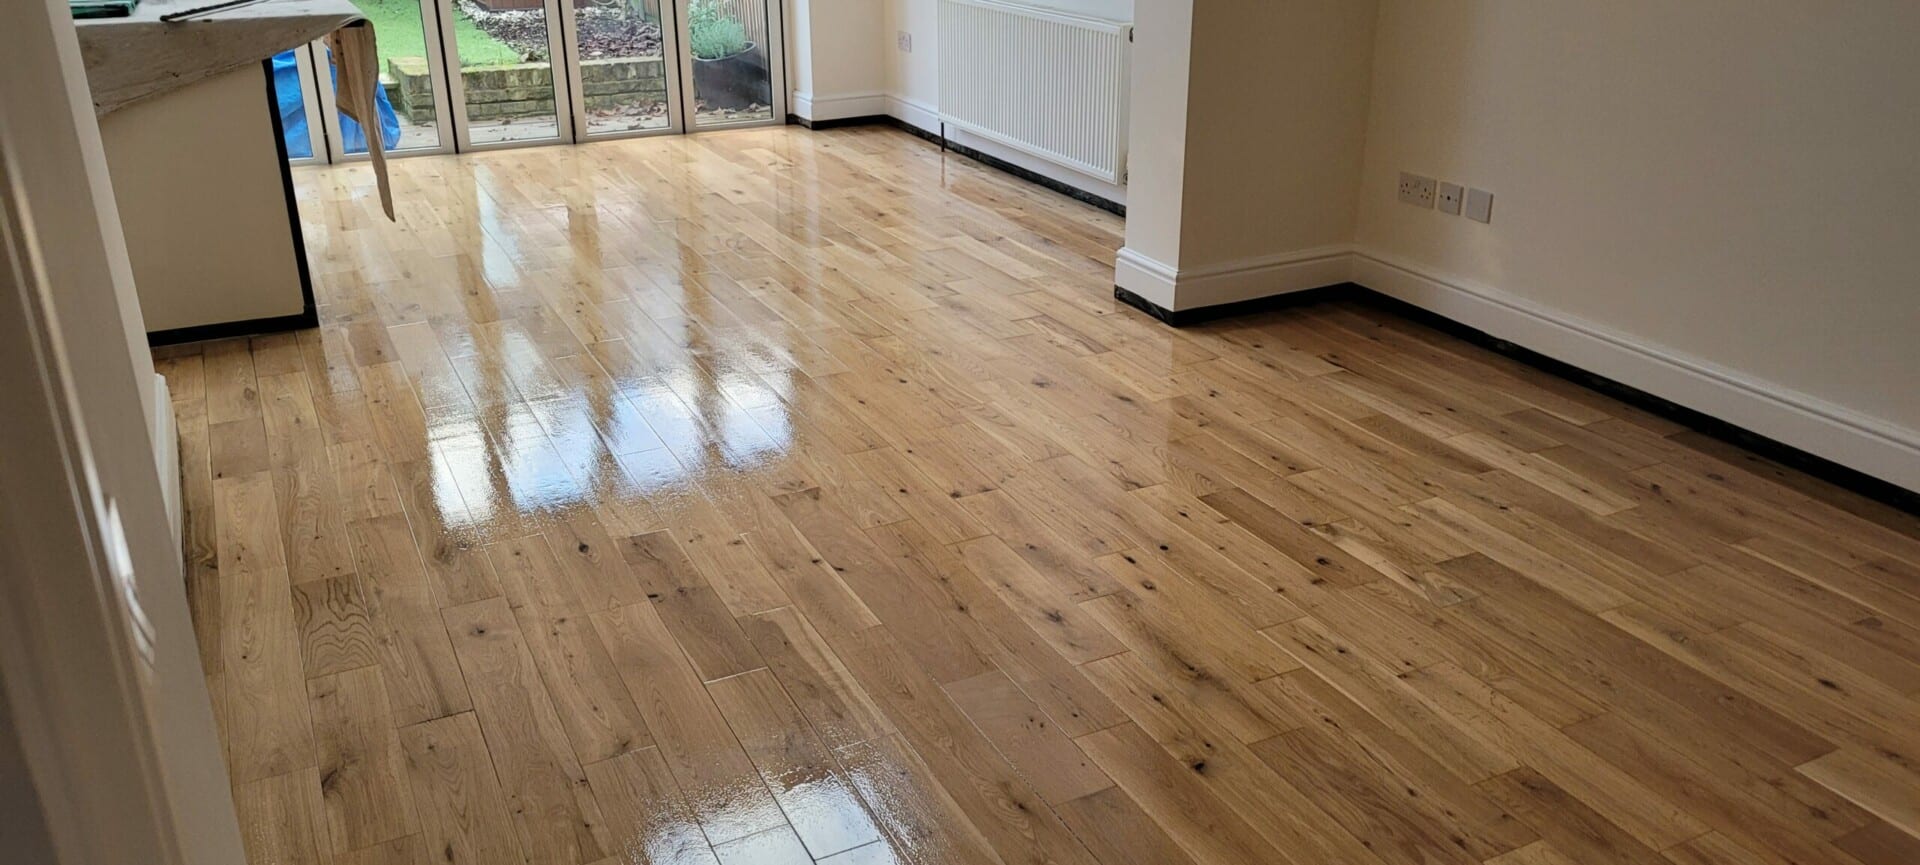 Shiny wooden flooring extending from a kitchen area to a room with glass doors leading to the outside.